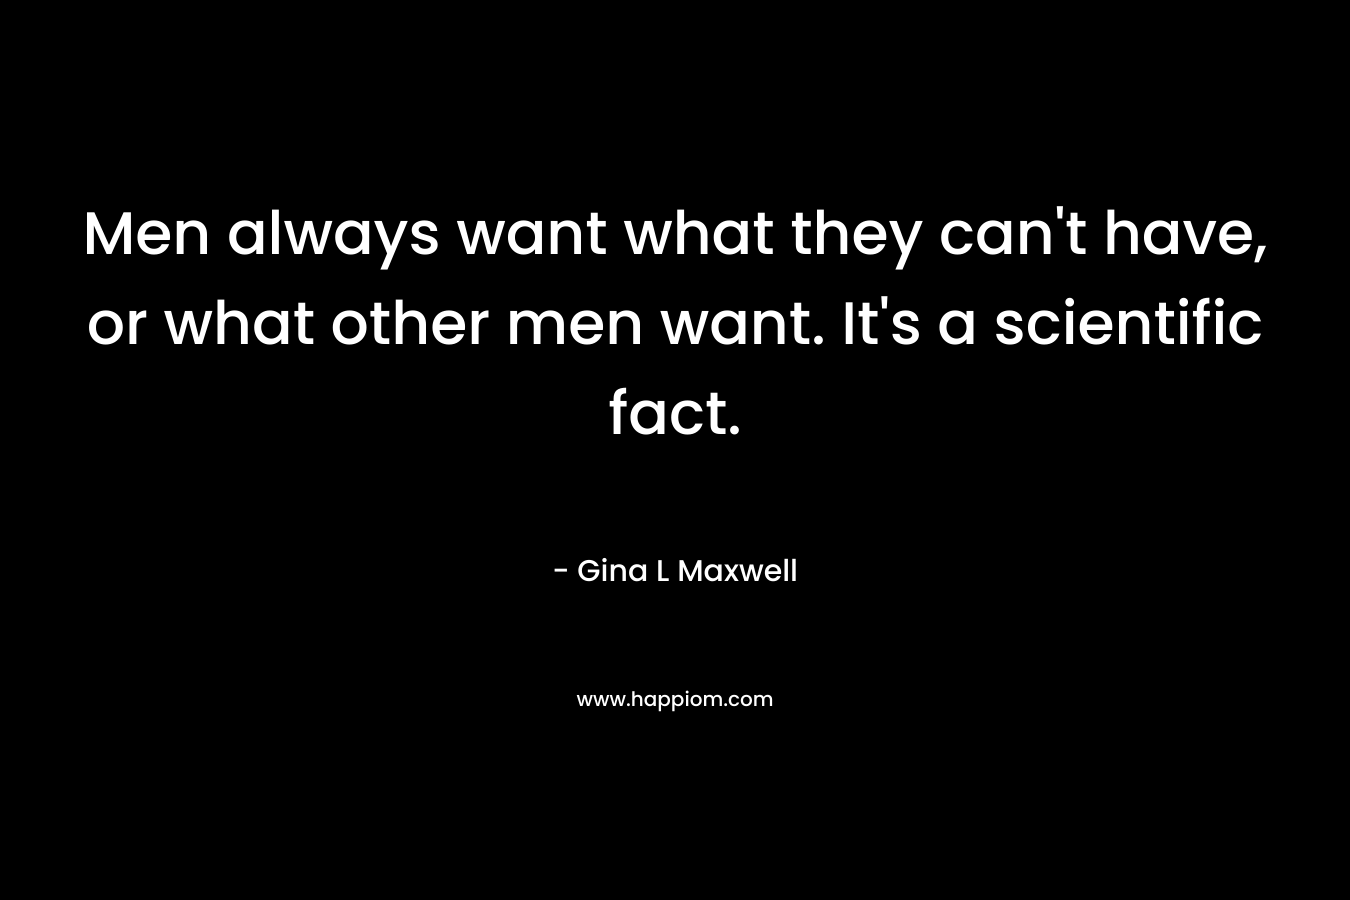 Men always want what they can't have, or what other men want. It's a scientific fact.